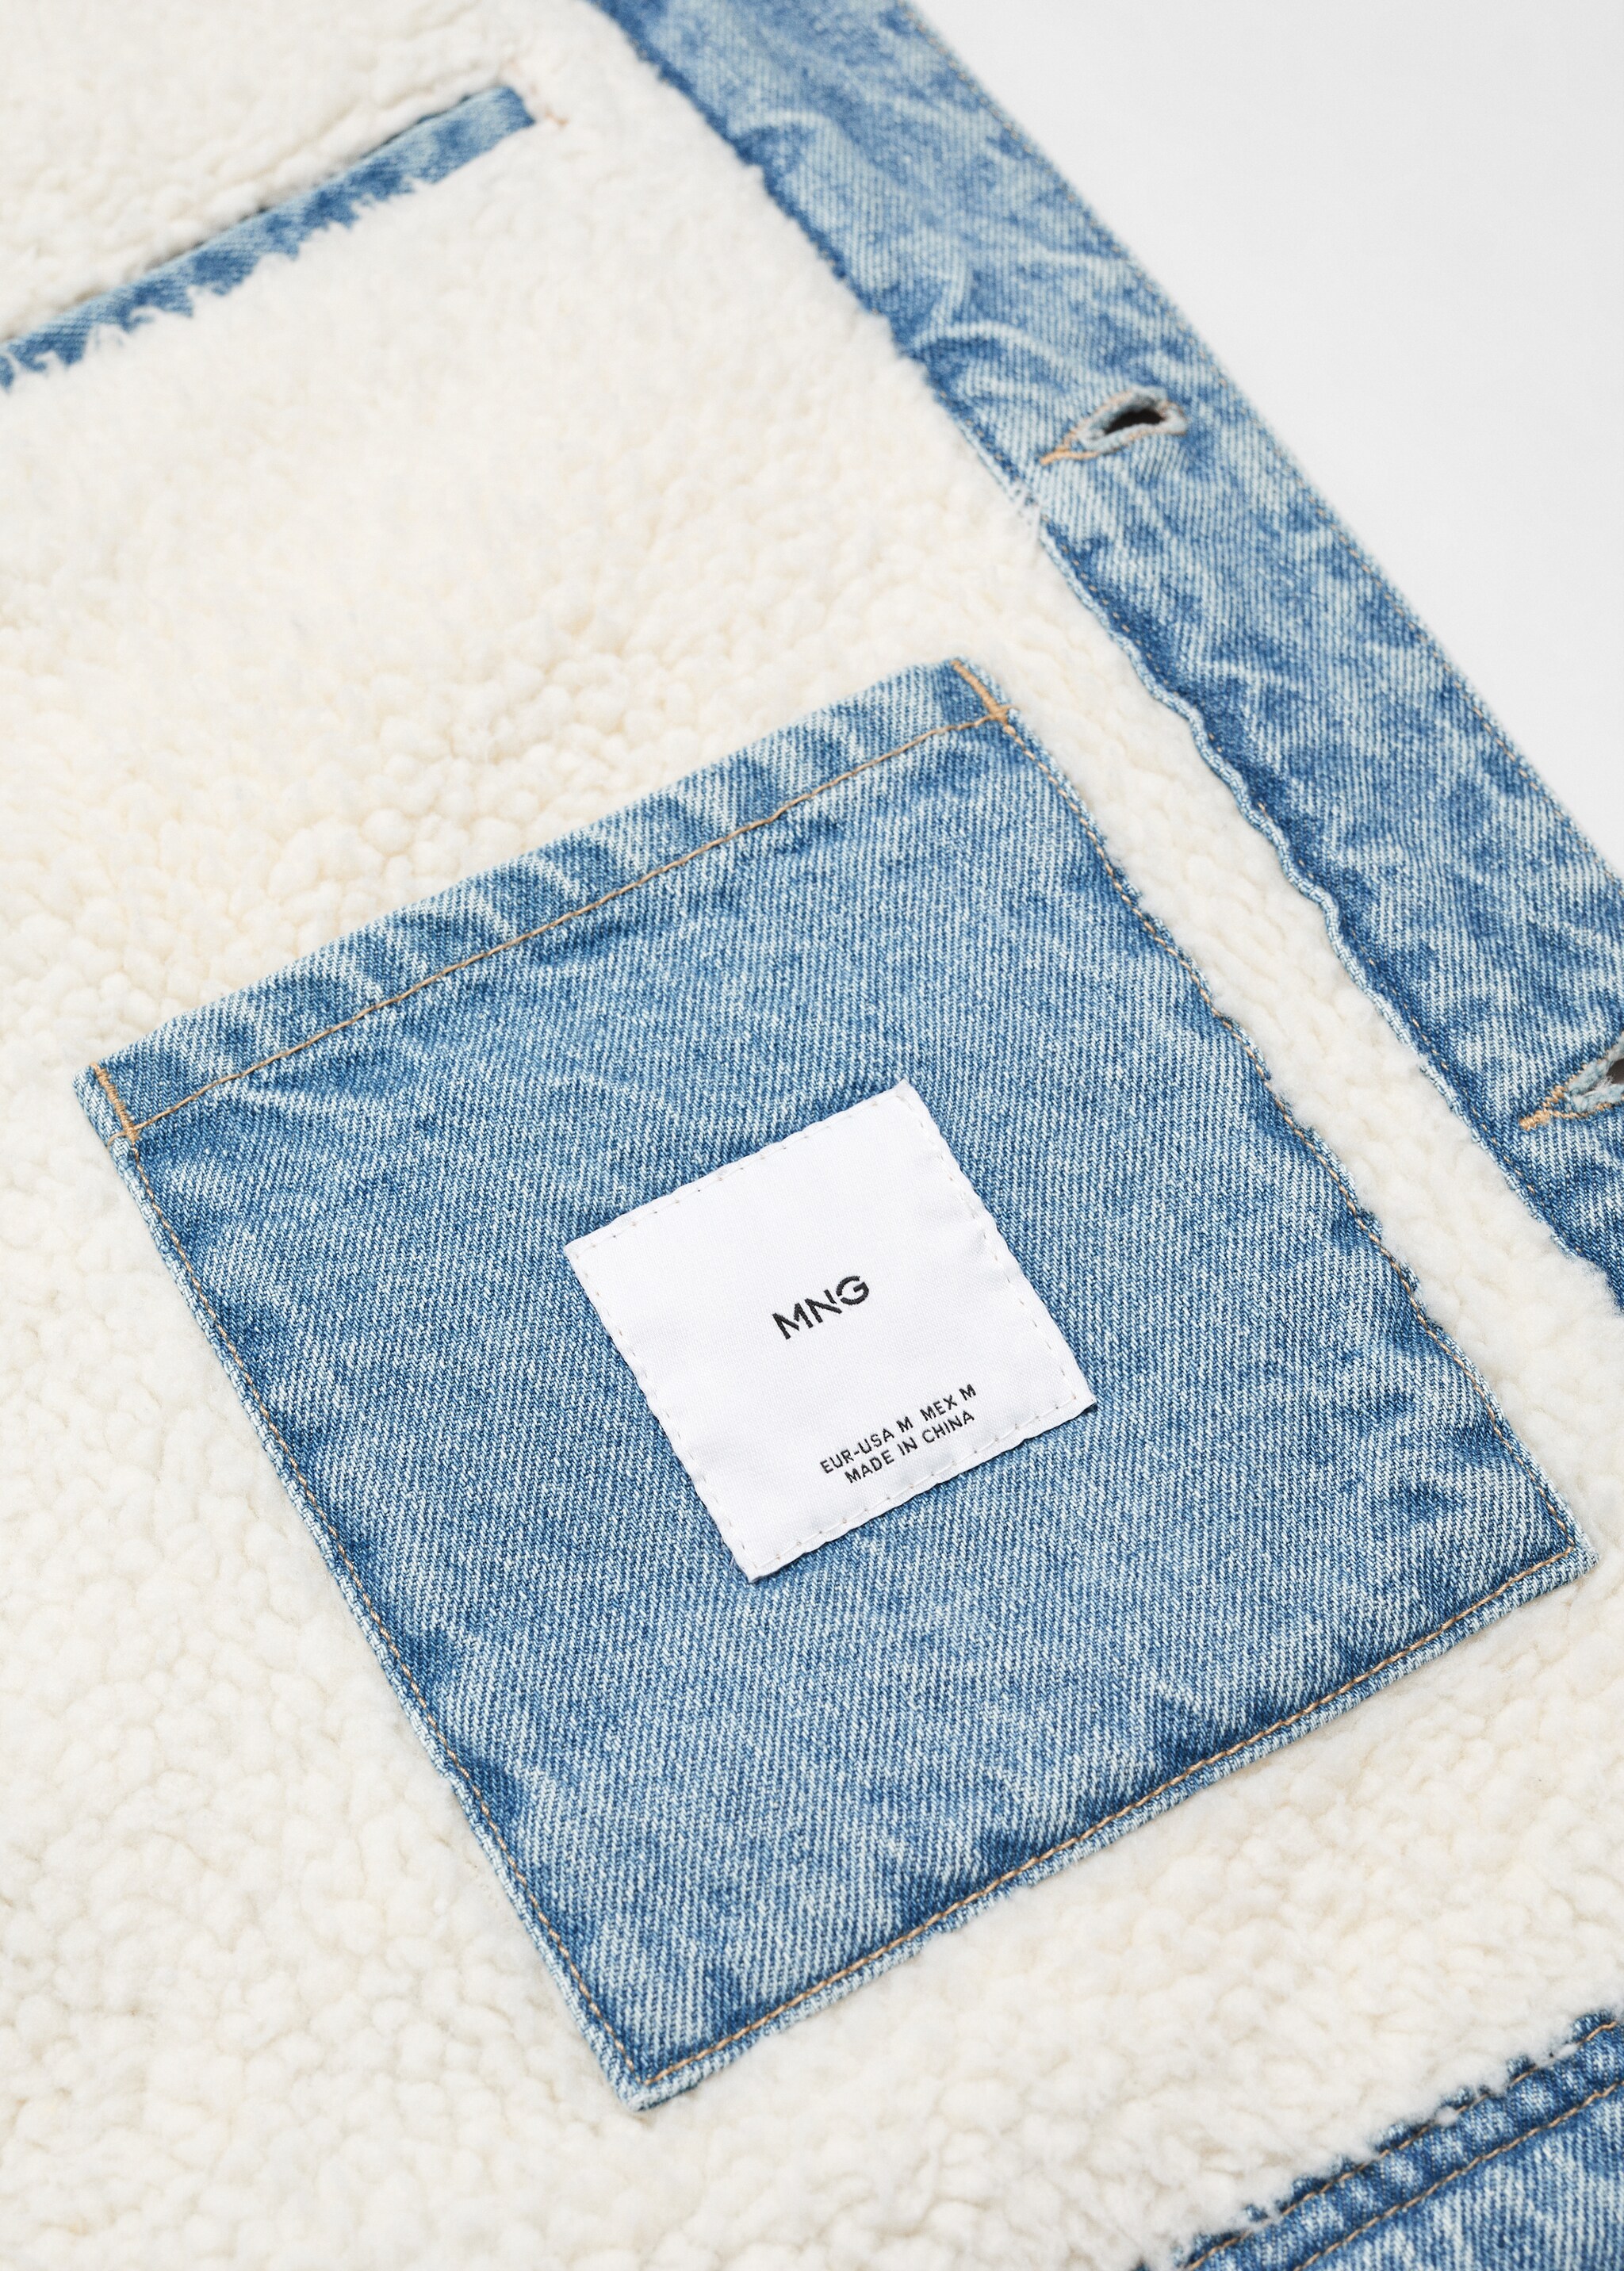 Shearling denim jacket - Details of the article 8